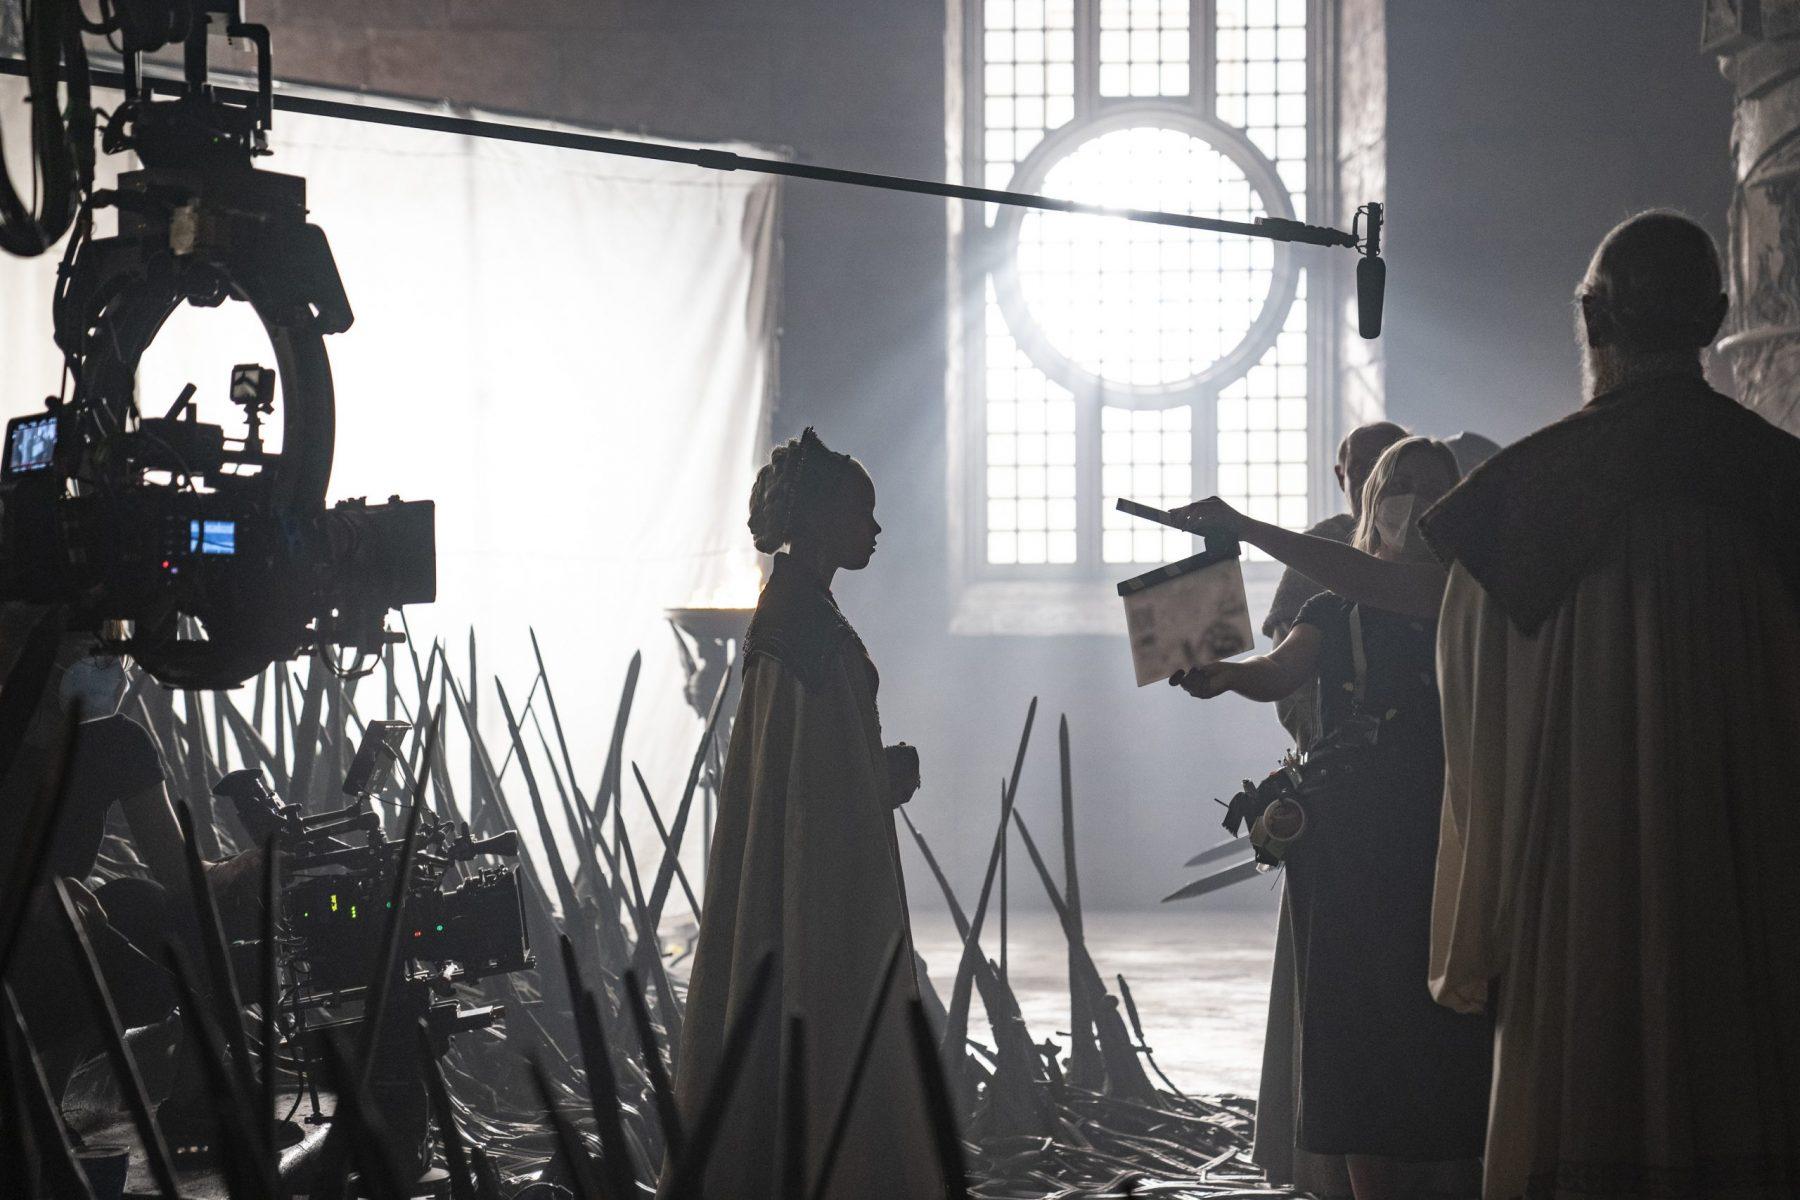 Milly Alcock filming in the Iron Throne Room in House of the Dragon Season 1.